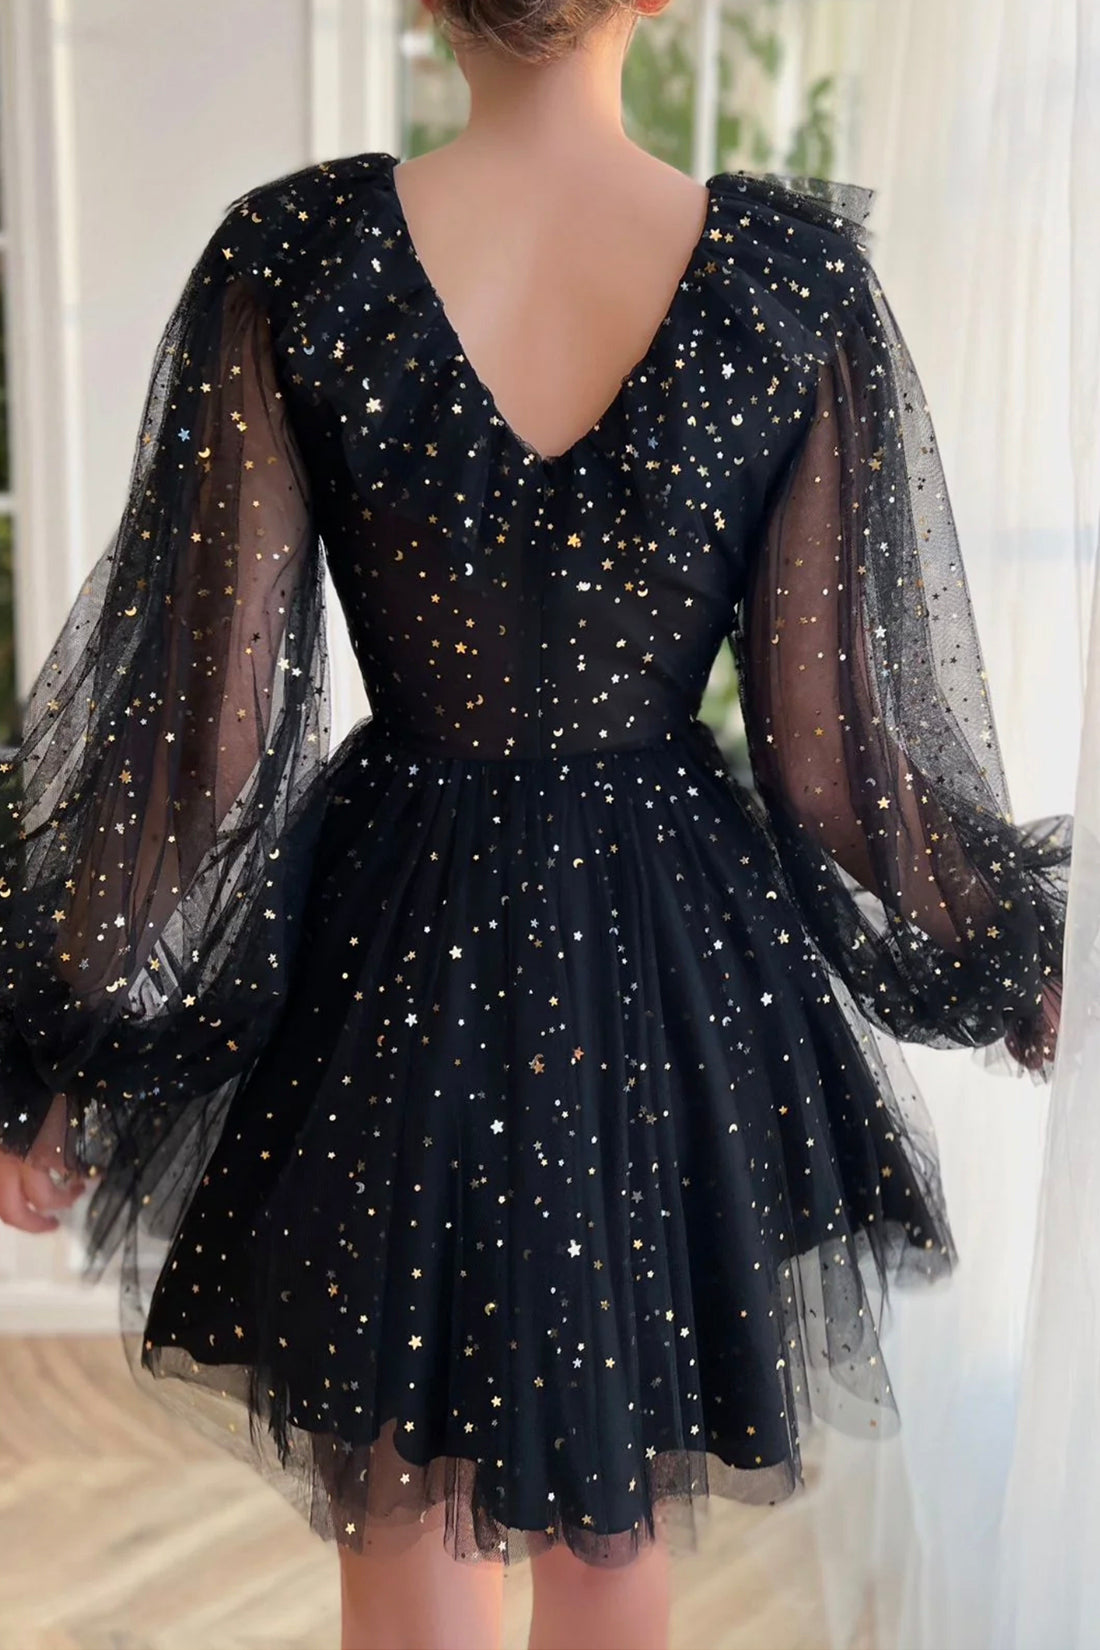 Black V-Neck Tulle Short Prom Dress, Cute Long Sleeve Homecoming Party Dress